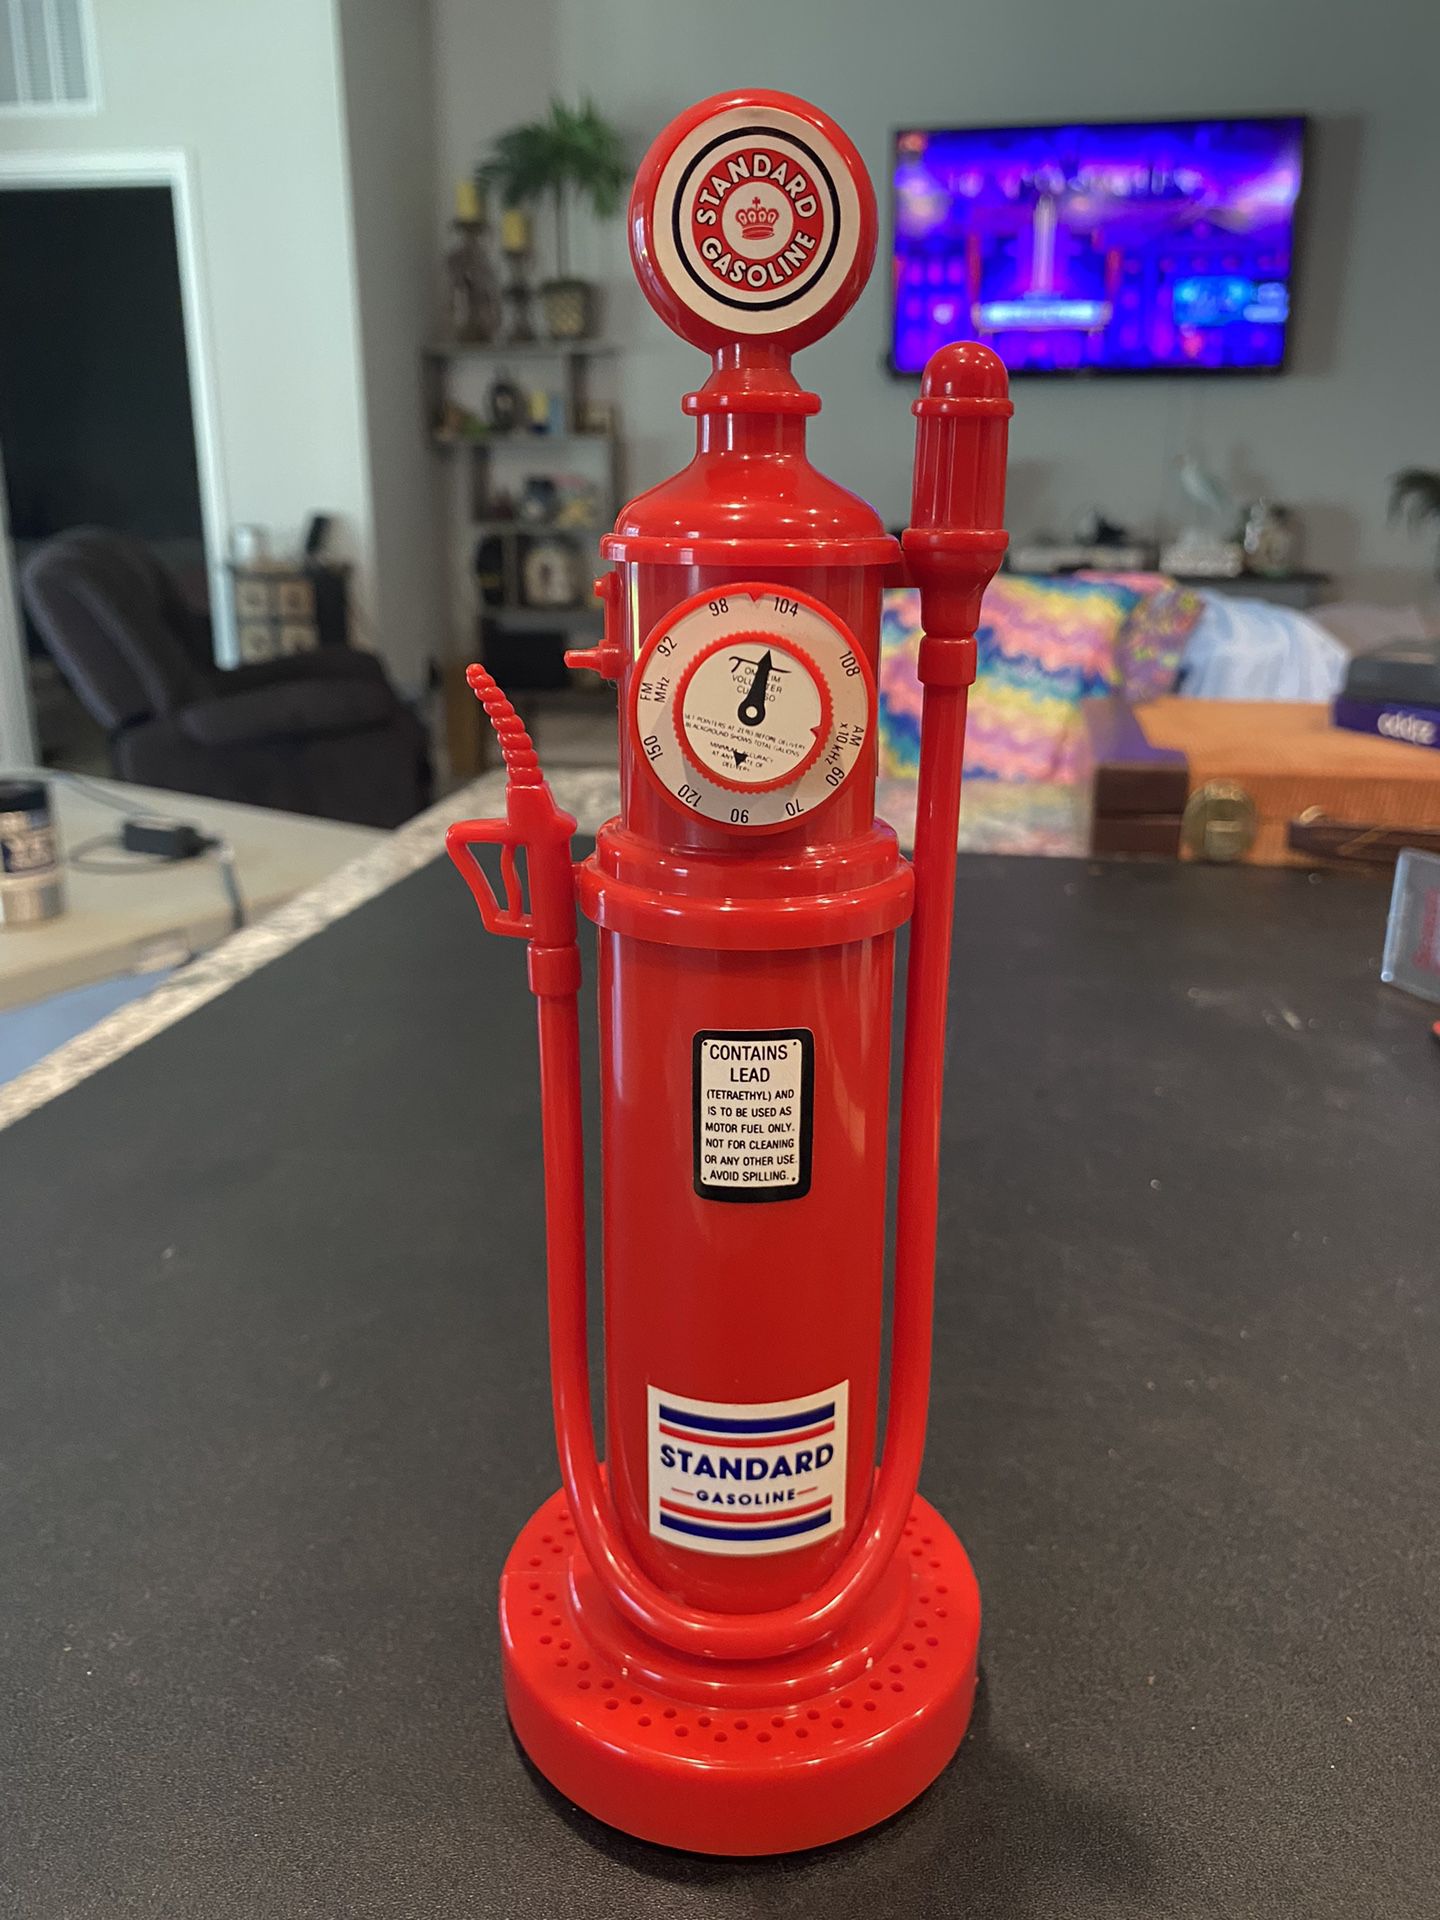 Vintage Standard Gasoline (Chevron) Pump Plastic Advertising Transistor FM/AM Radio. Tested and working! Measures approximately: 9.5" inches (Tall) an